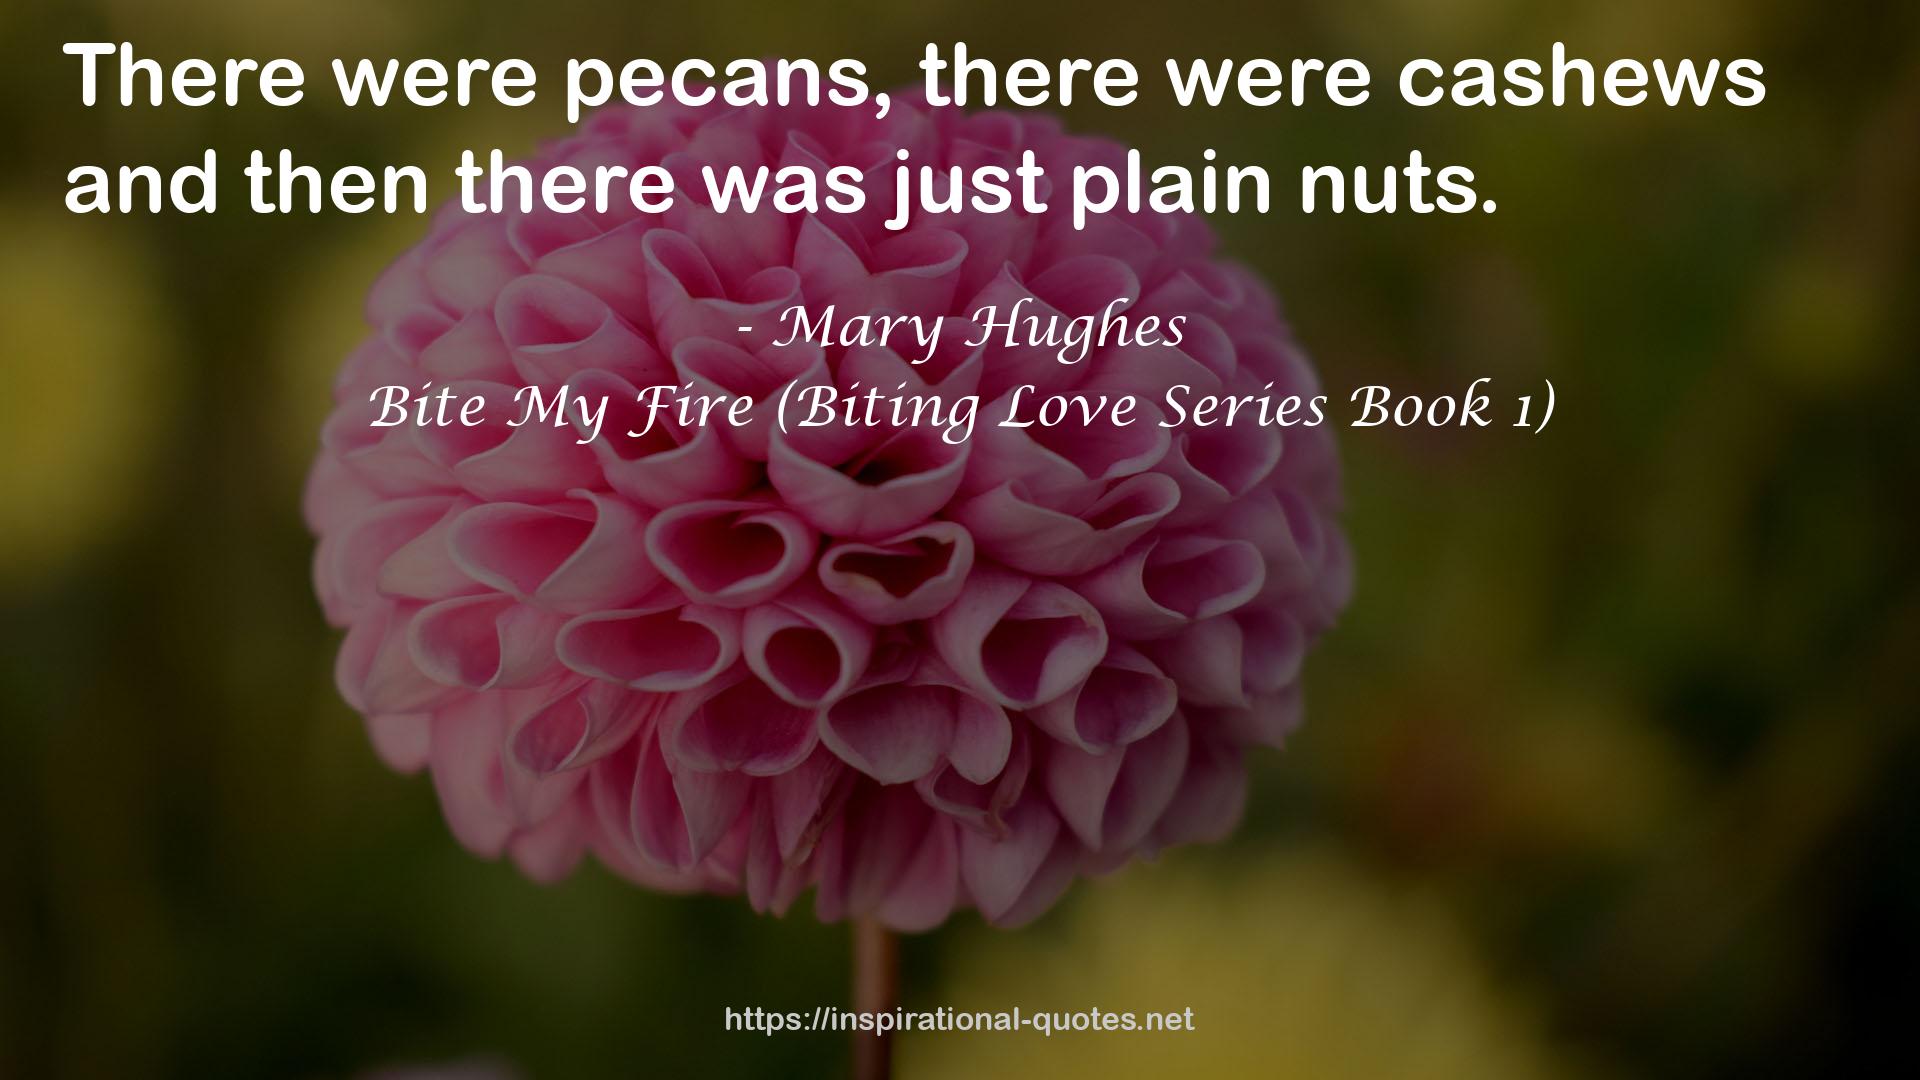 Bite My Fire (Biting Love Series Book 1) QUOTES